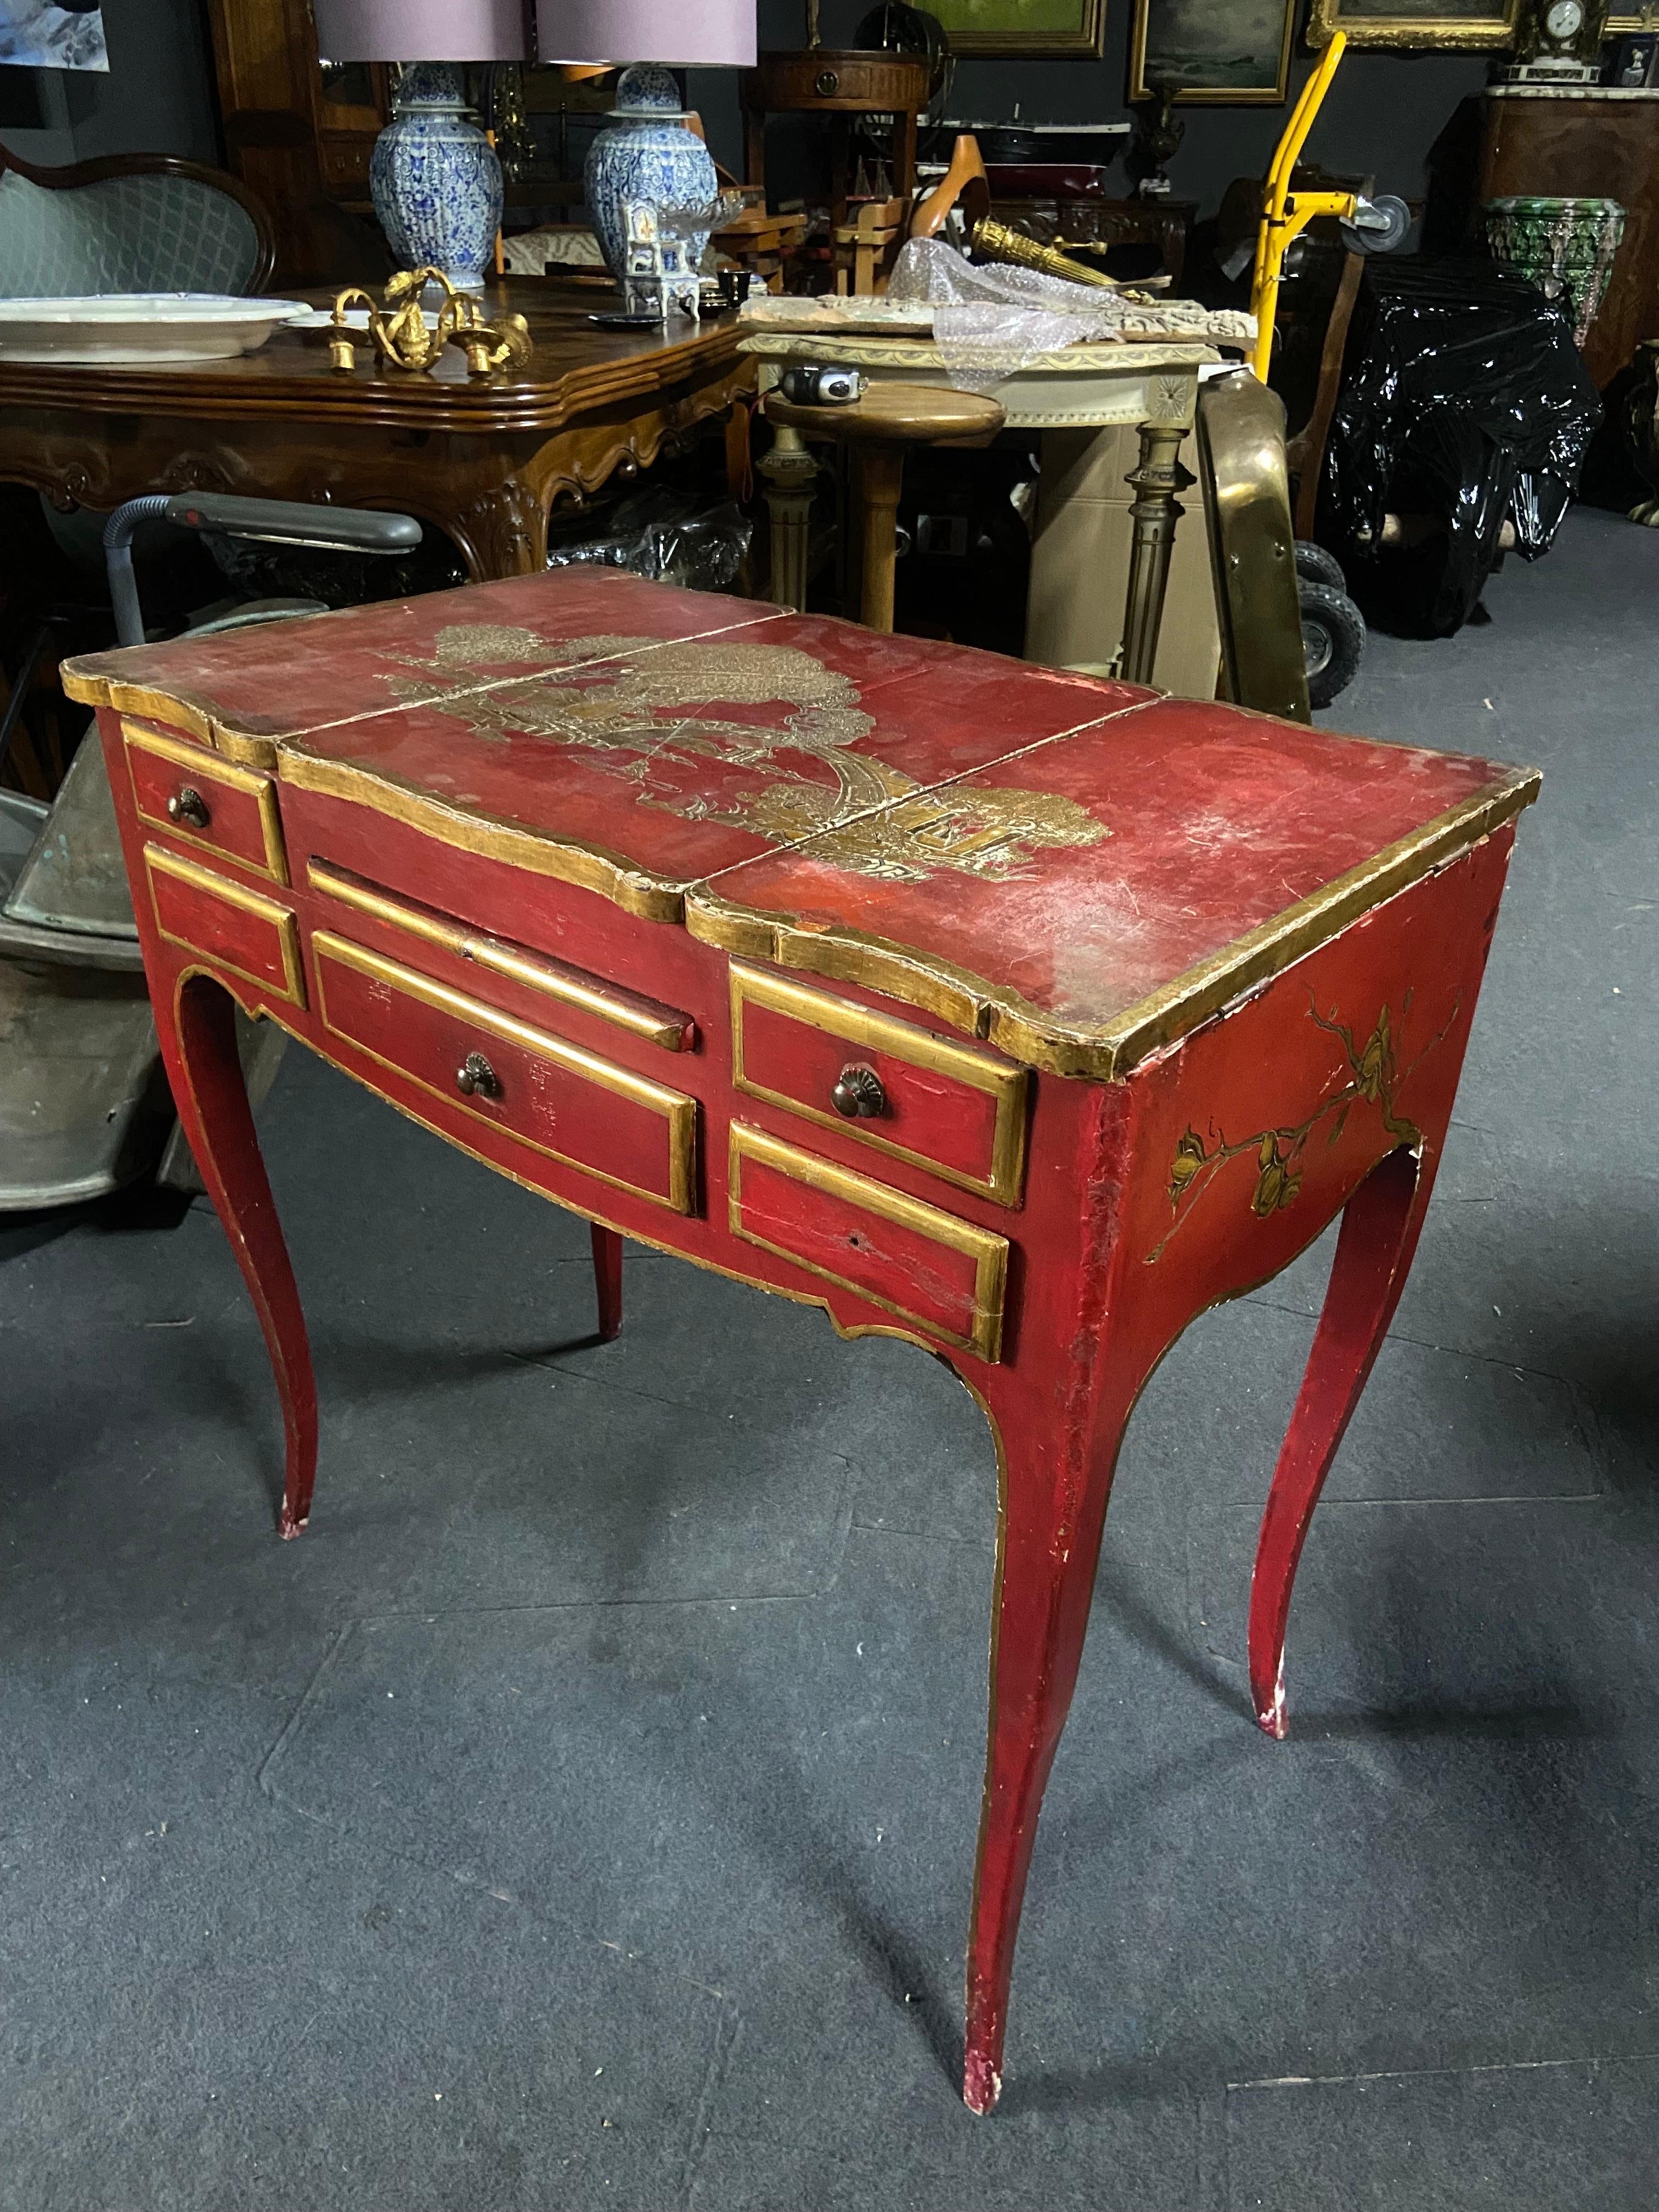 19th century impressing vanity table made in hand carved wood with Chinese figures hand painted in gold as a decoration of the piece which is painted in beautiful red colour with golden edges all around. The table is it original condition with no